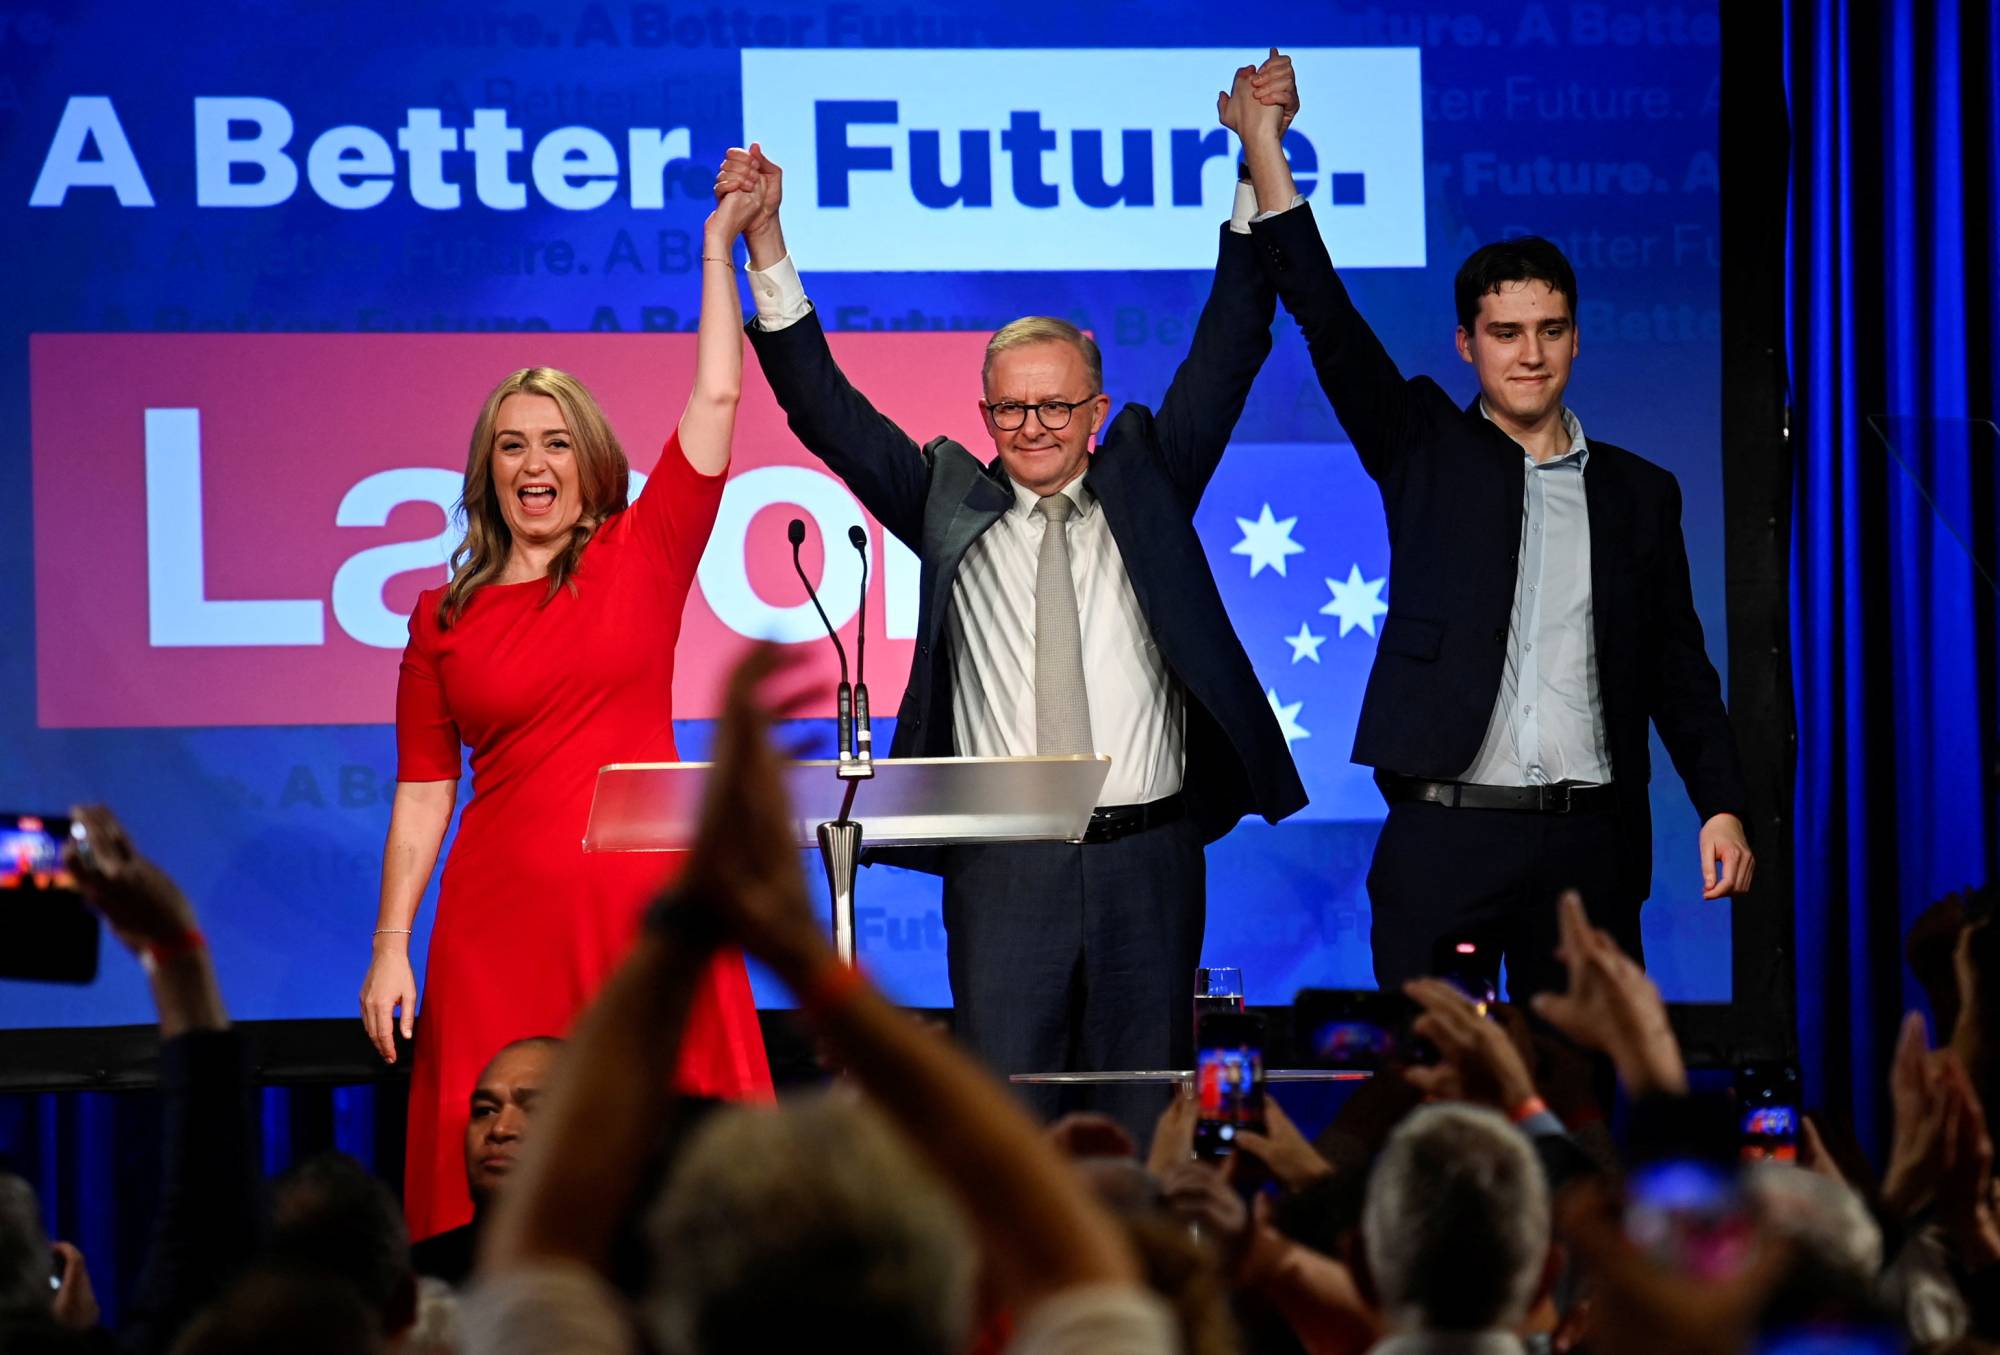 Anthony Albanese, leader of Australia's Labor Party, is accompanied by his partner Jodie Haydon and son Nathan Albanese to address his supporters in Sydney after his election victory on Saturday. | REUTERS